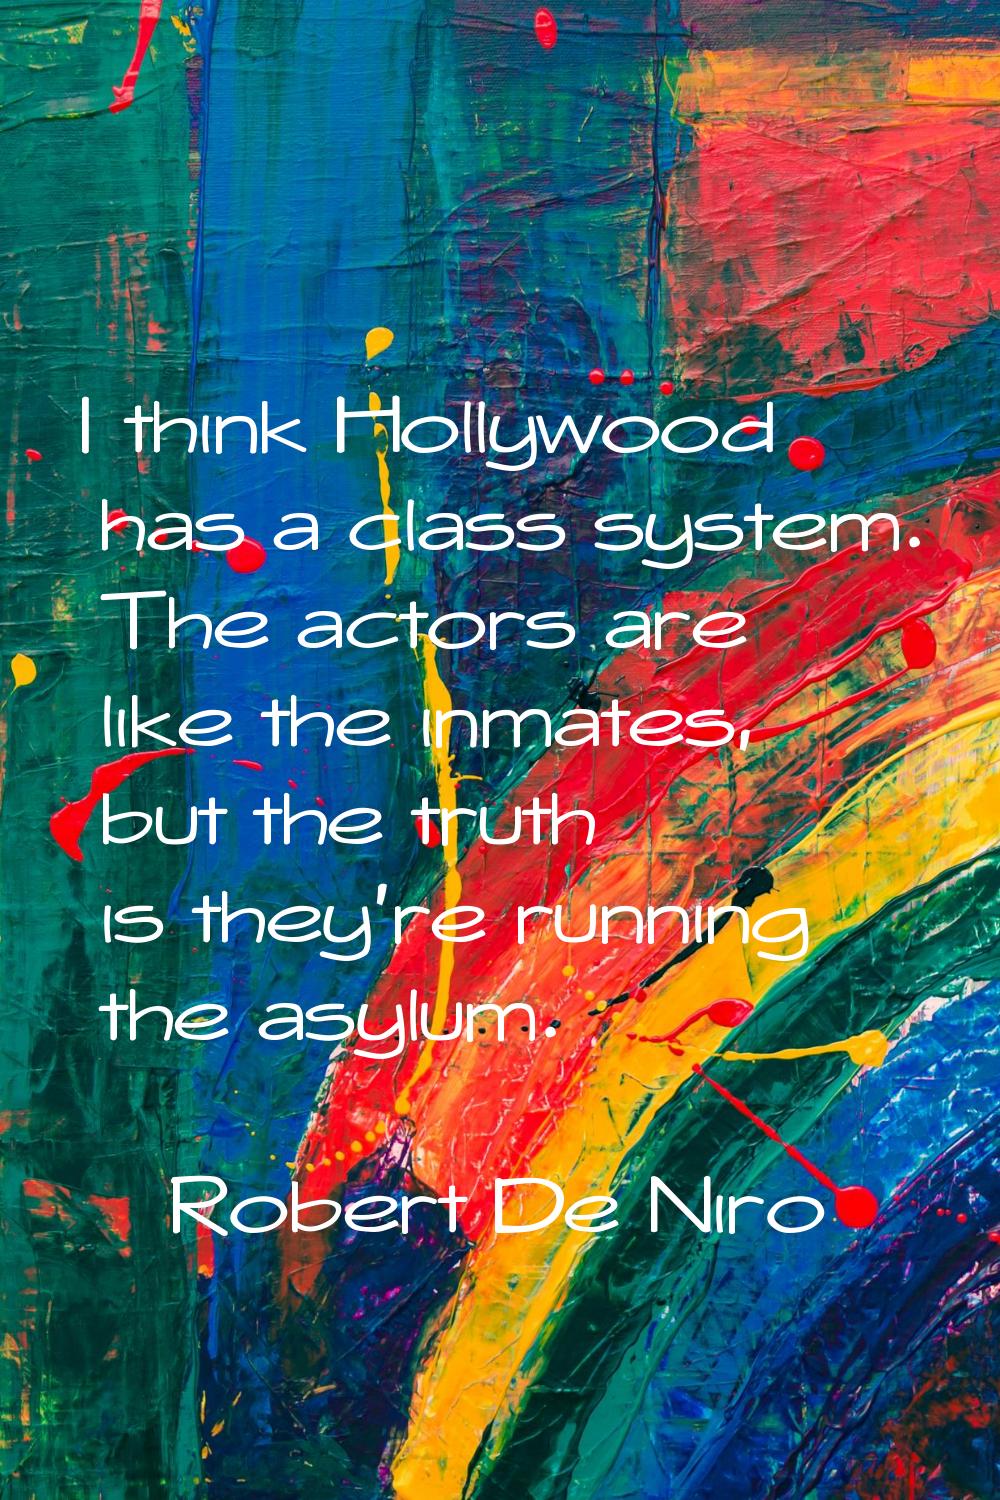 I think Hollywood has a class system. The actors are like the inmates, but the truth is they're run